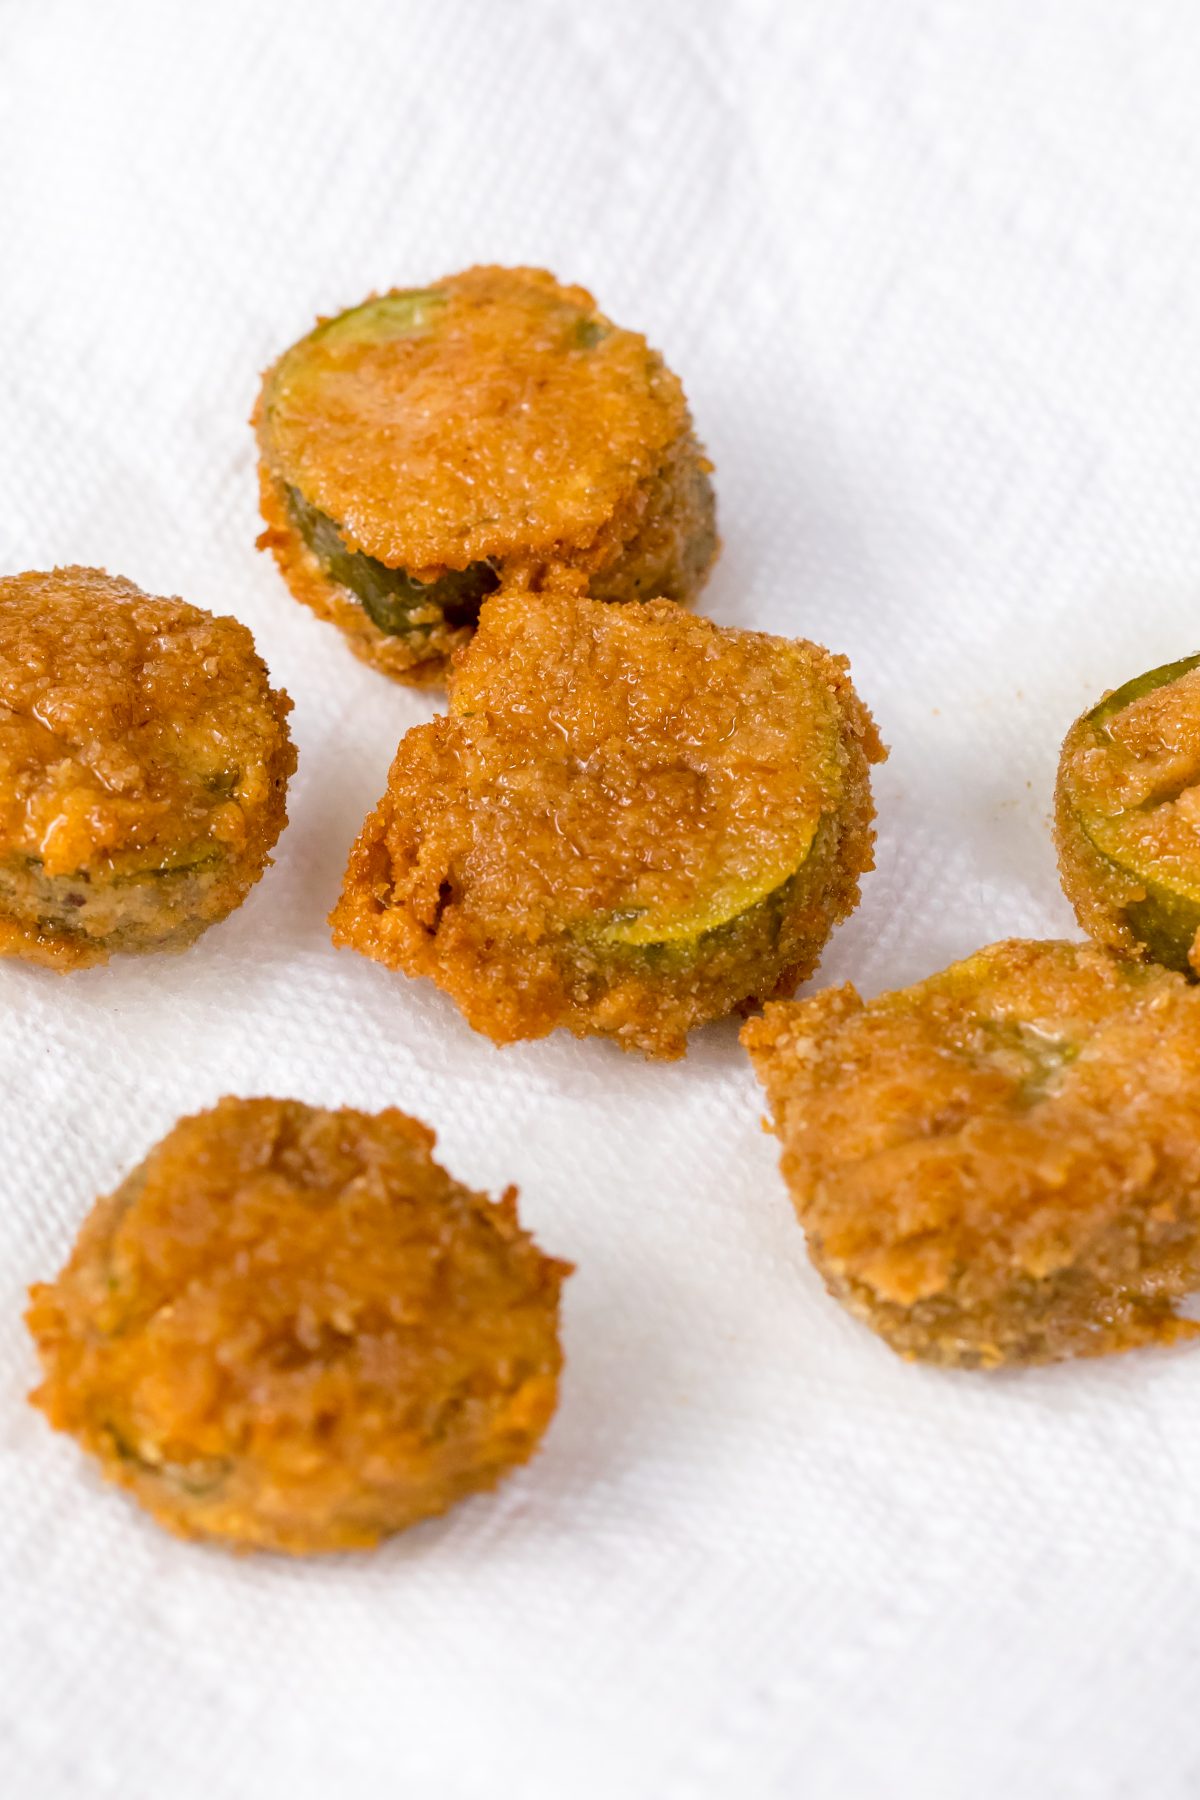 Place The best extra crispy fried pickles with Cajun dipping sauce on papertowels